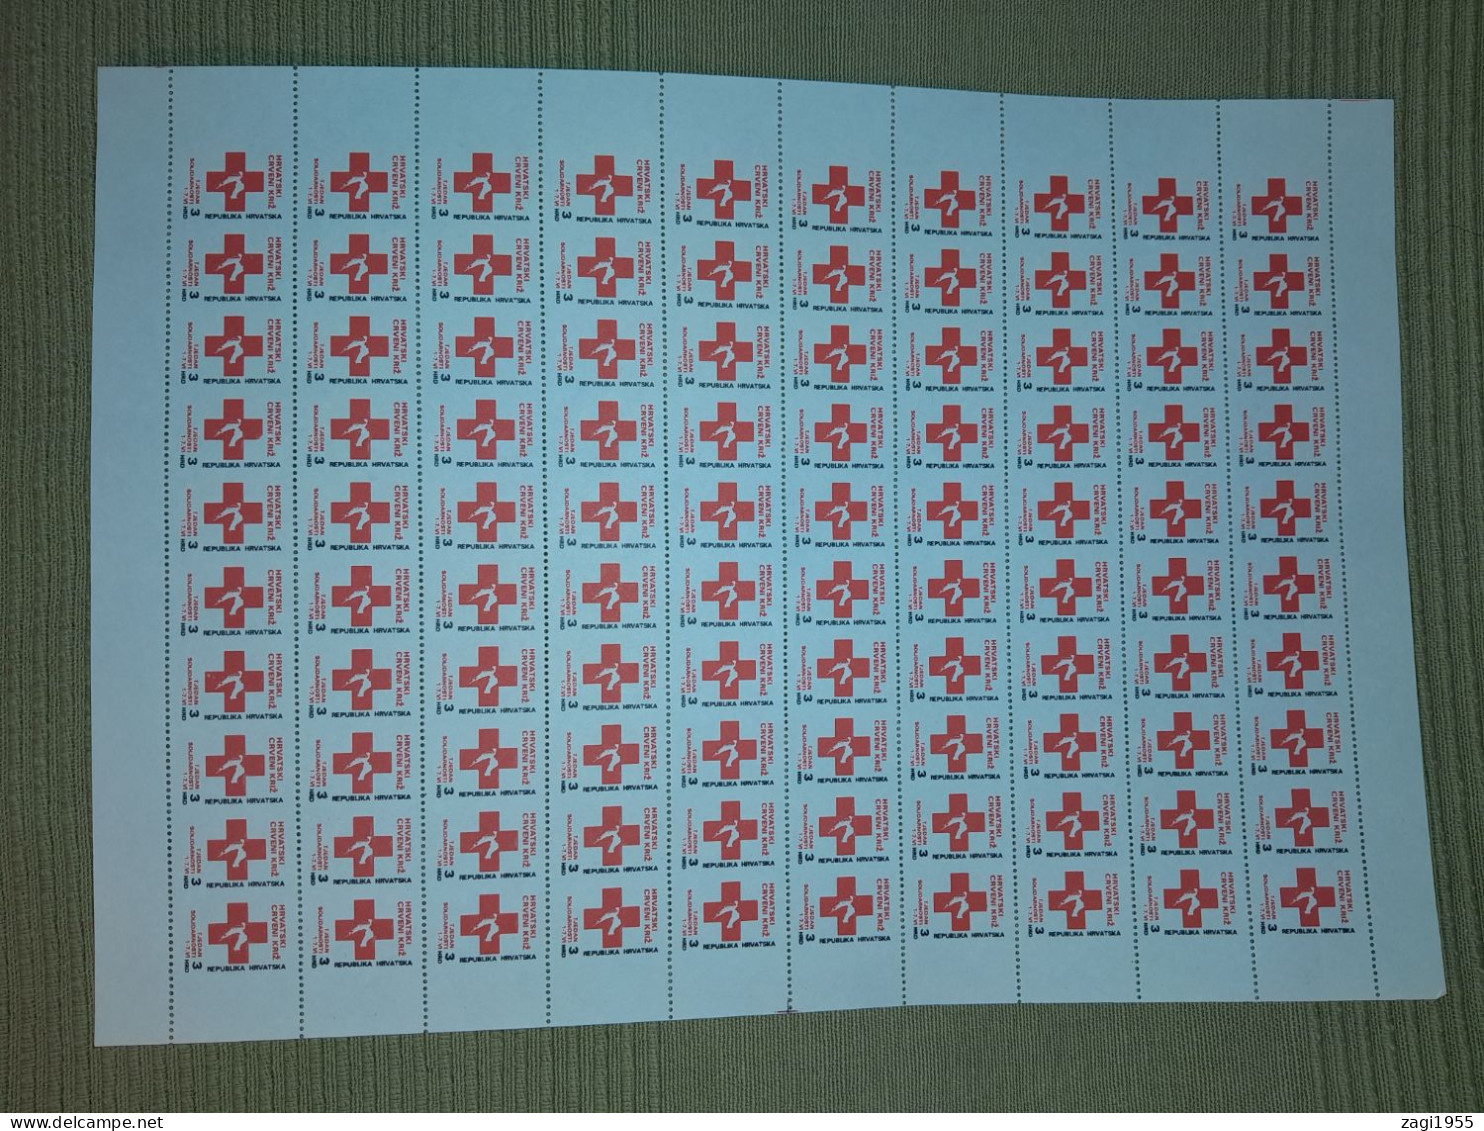 Croatia 1992 Sheet Red Cross Solidarity One Half IMPERFORATED, Perforated Only Horisontally - Kroatien